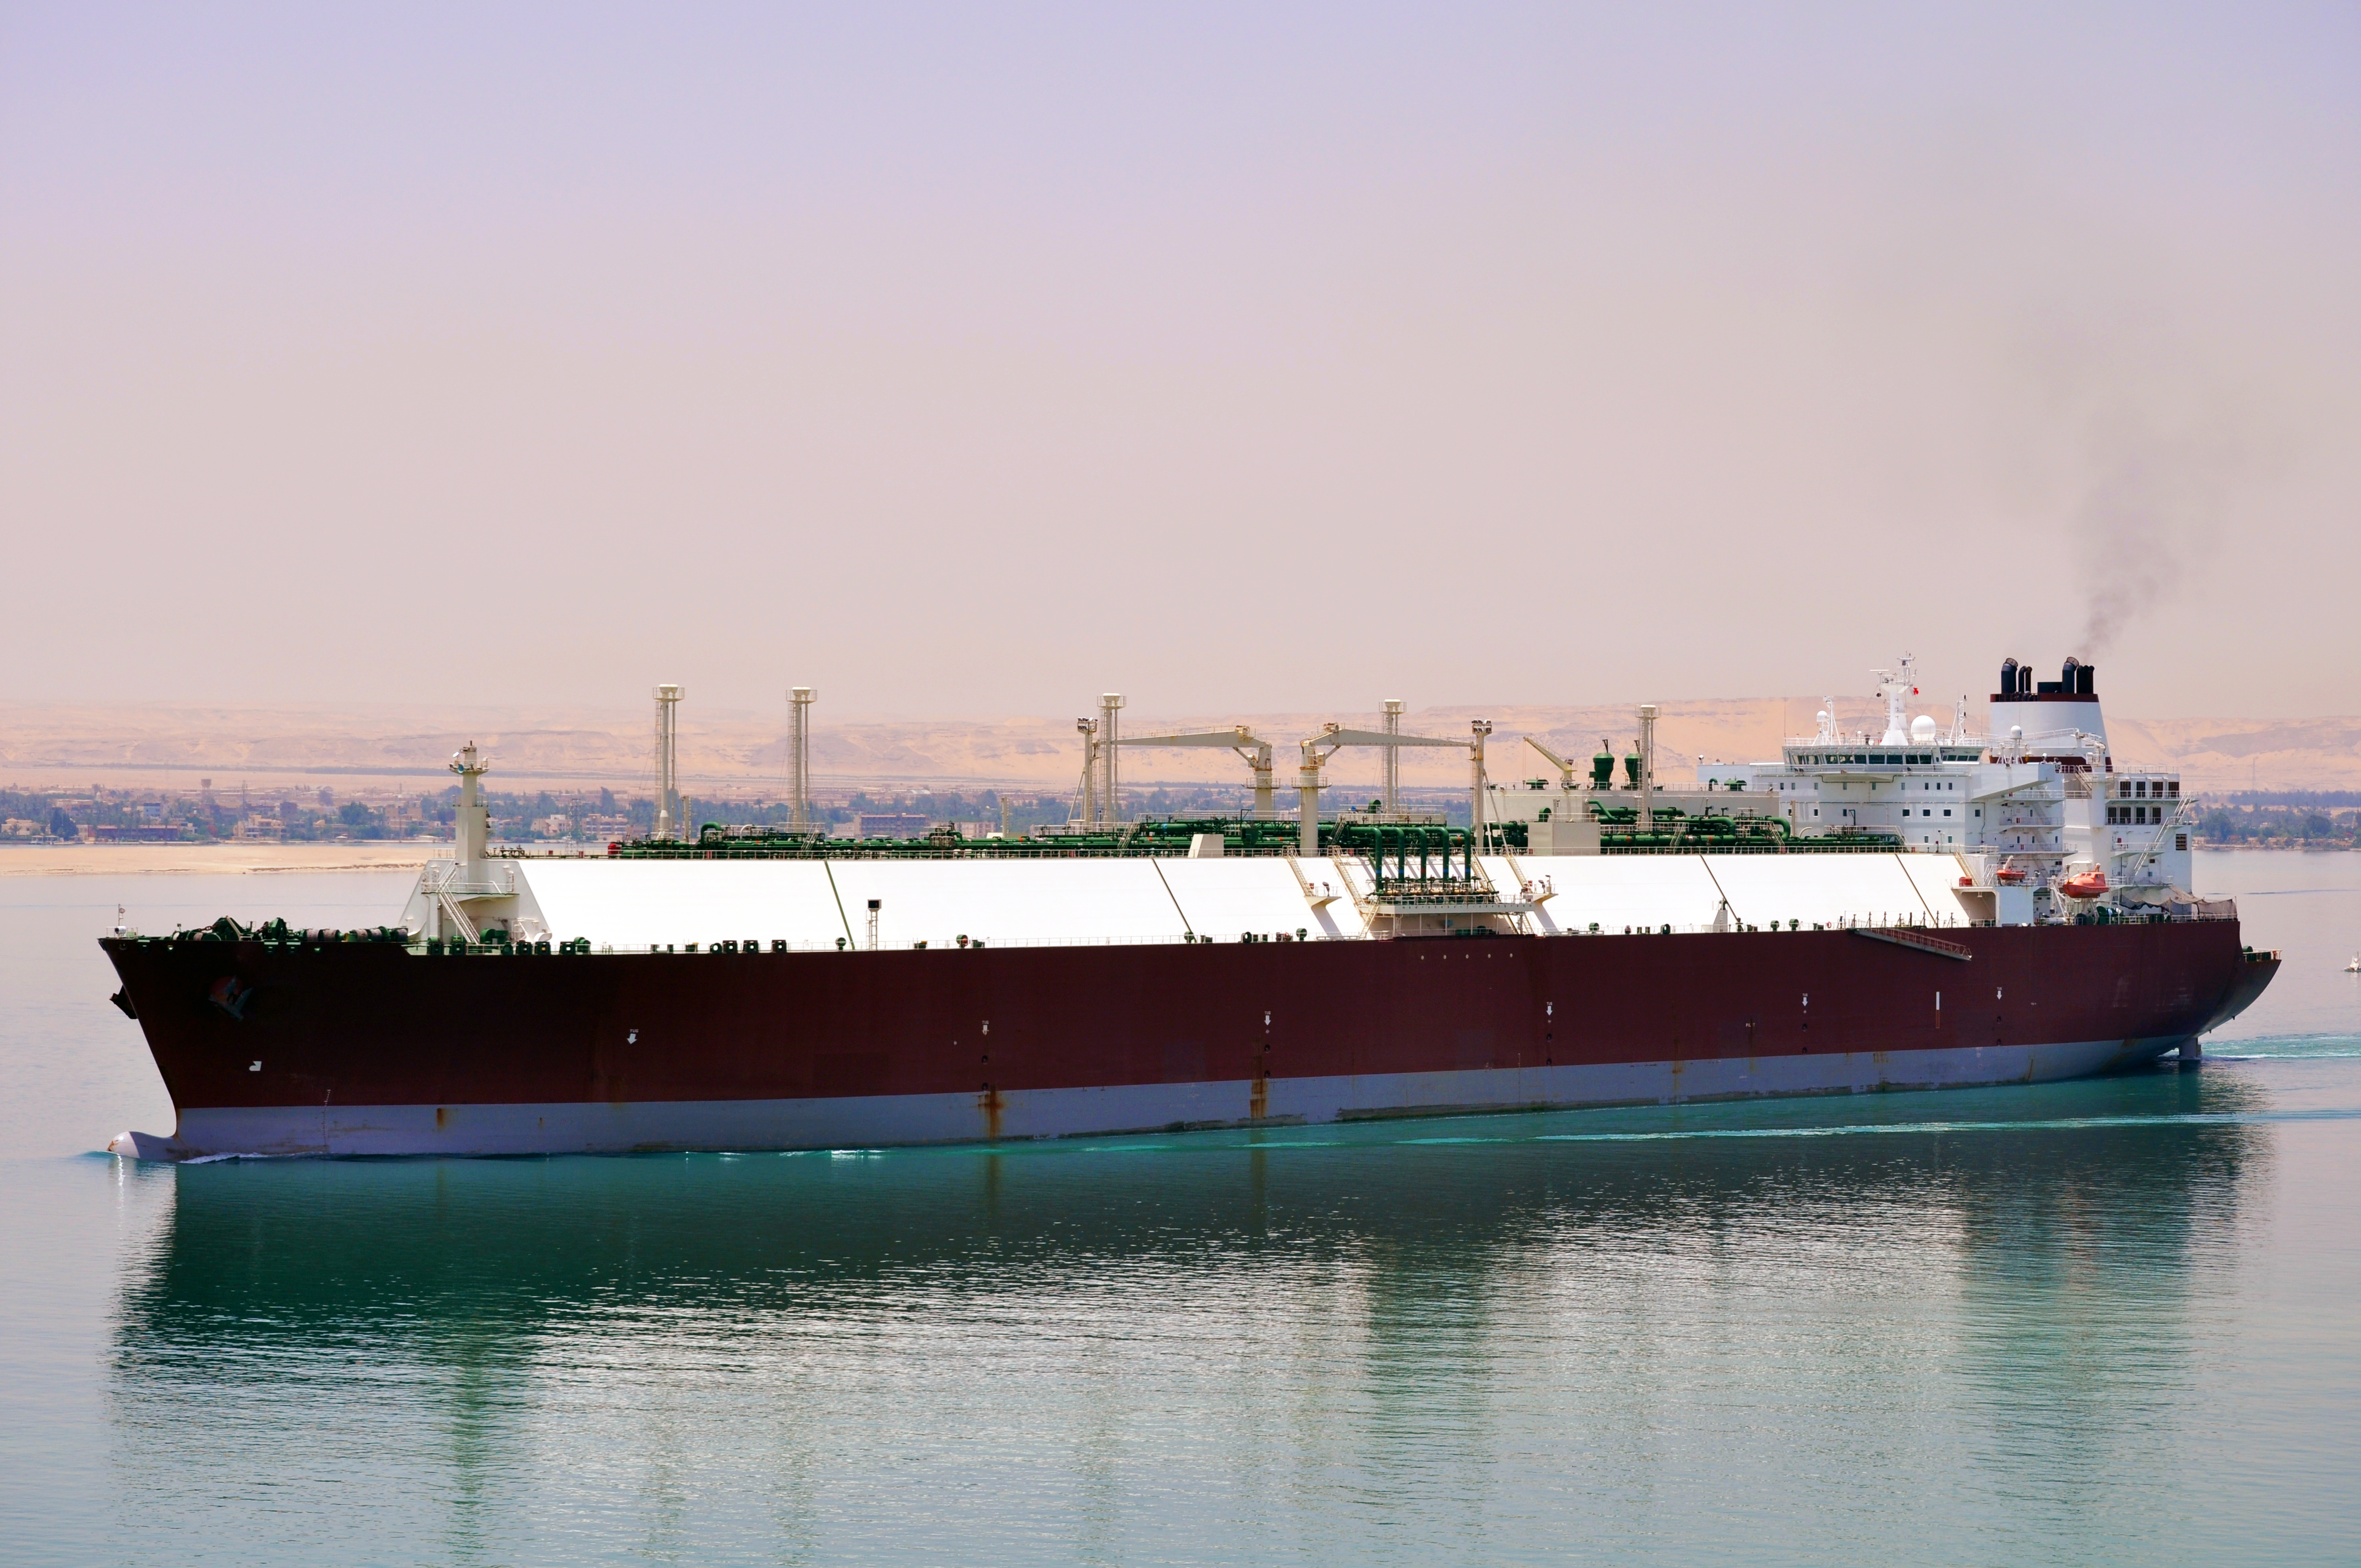 Shipping industry - LNG Tanker